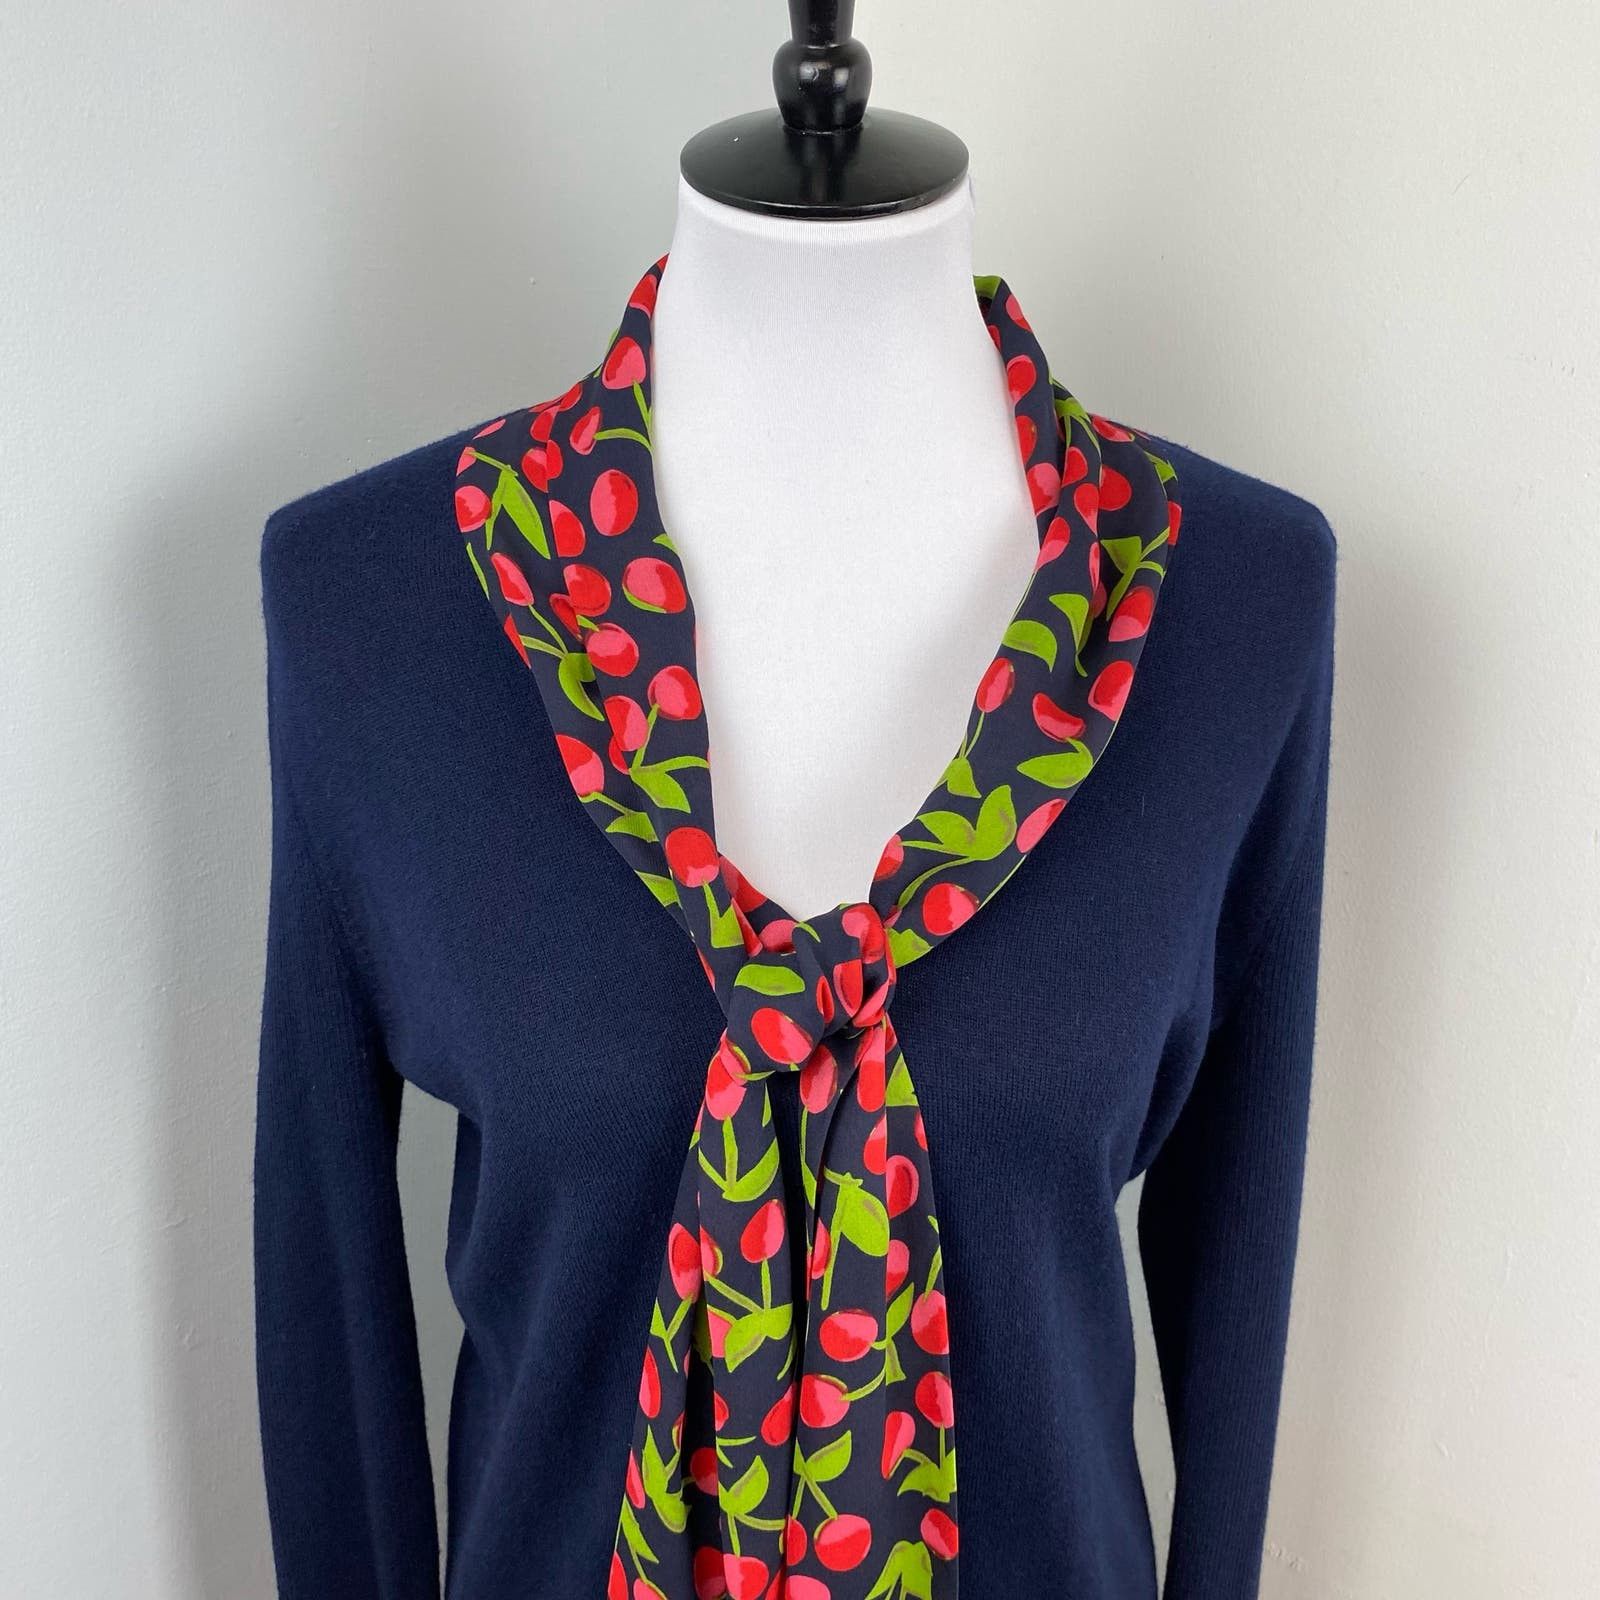 Tory Burch Tory Burch Navy Cashmere Silk Cherry Print Neck Tie Sweater Size L / US 10 / IT 46 - 2 Preview